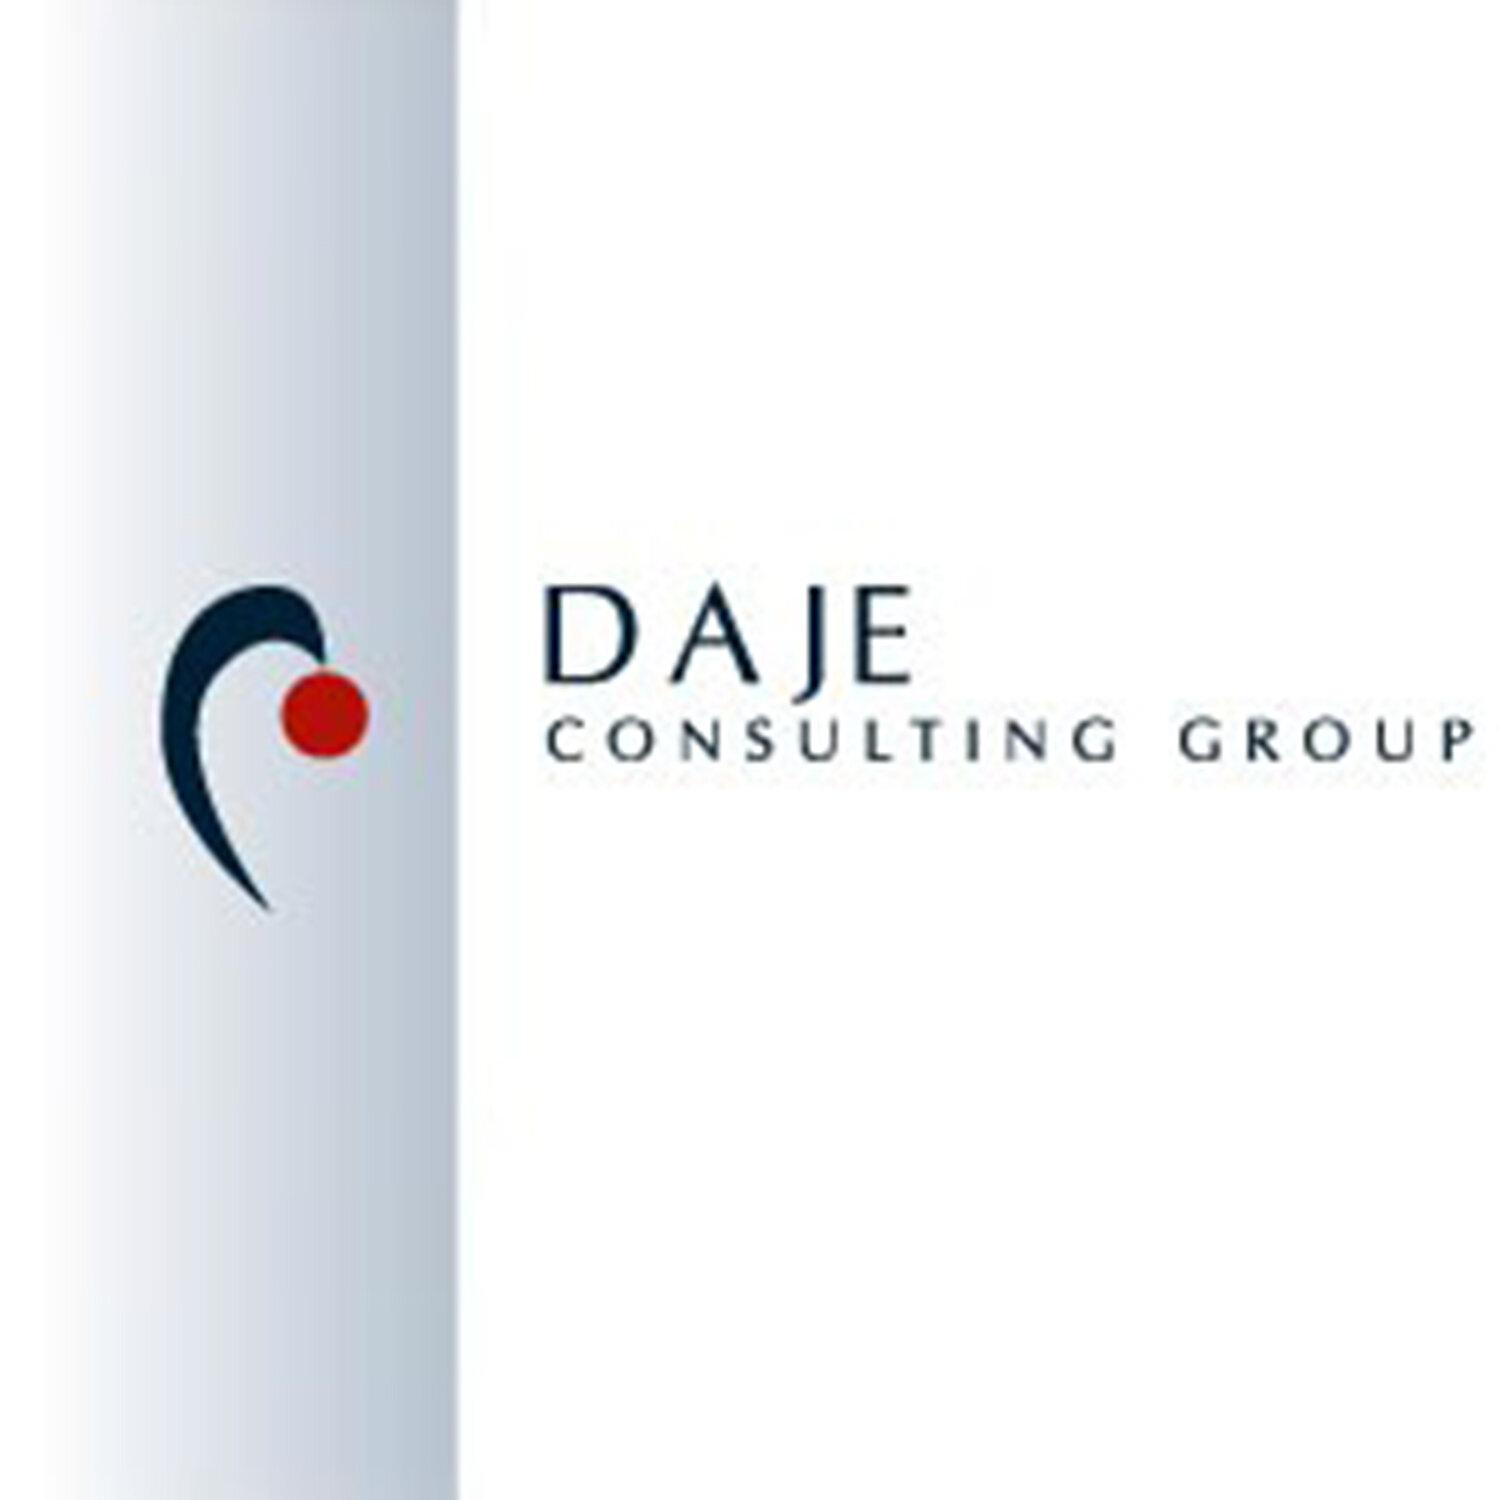 Daje Consulting Group